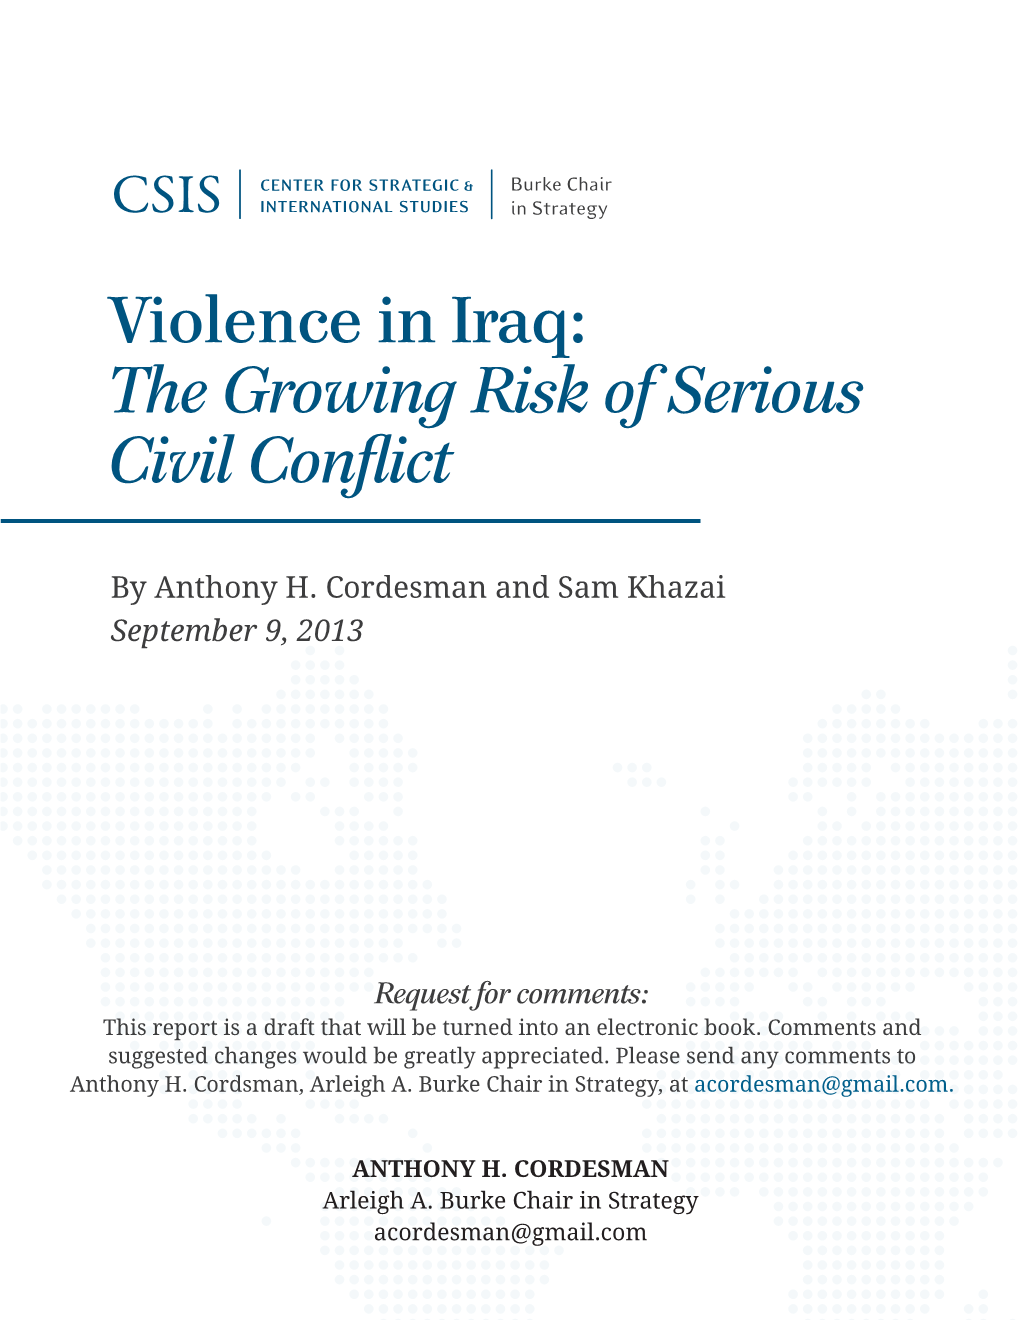 Violence in Iraq: the Growing Risk of Serious Civil Conflict